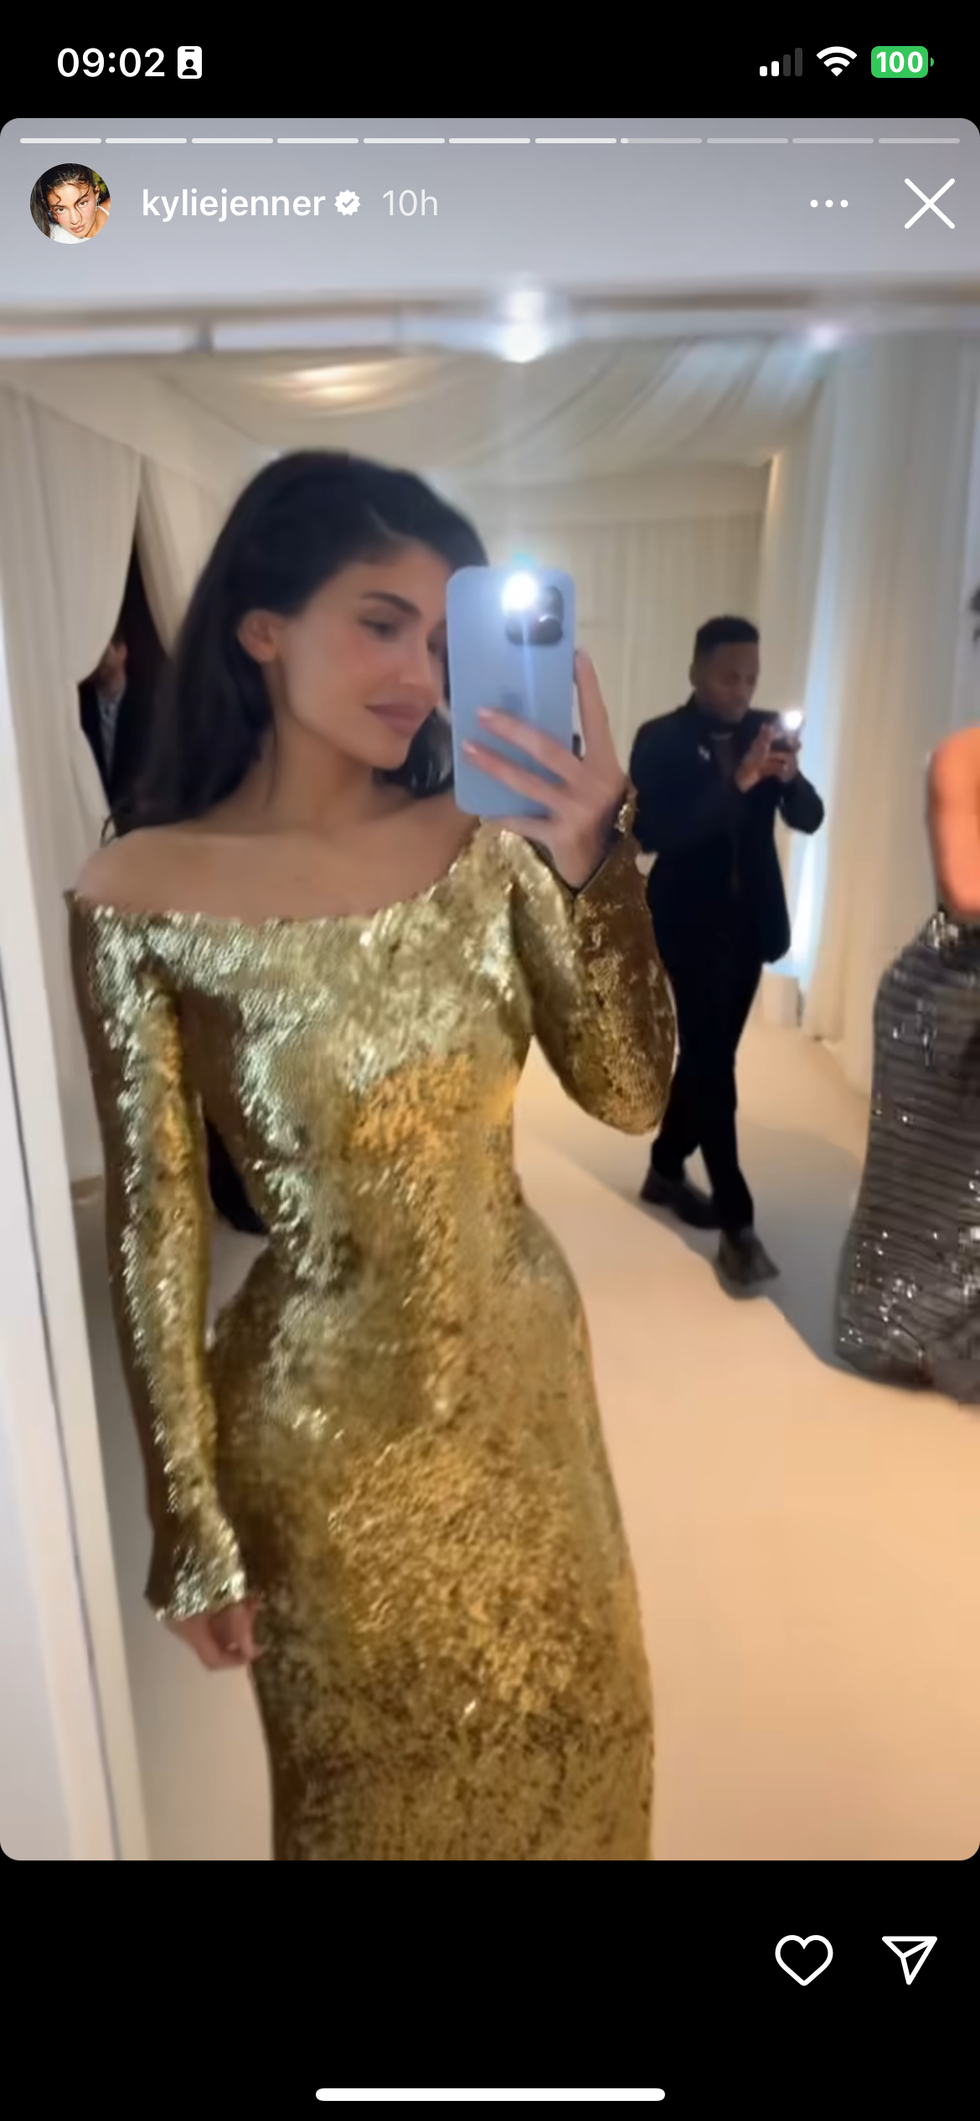 kylie jenner showing her and stormi webster’s dresses